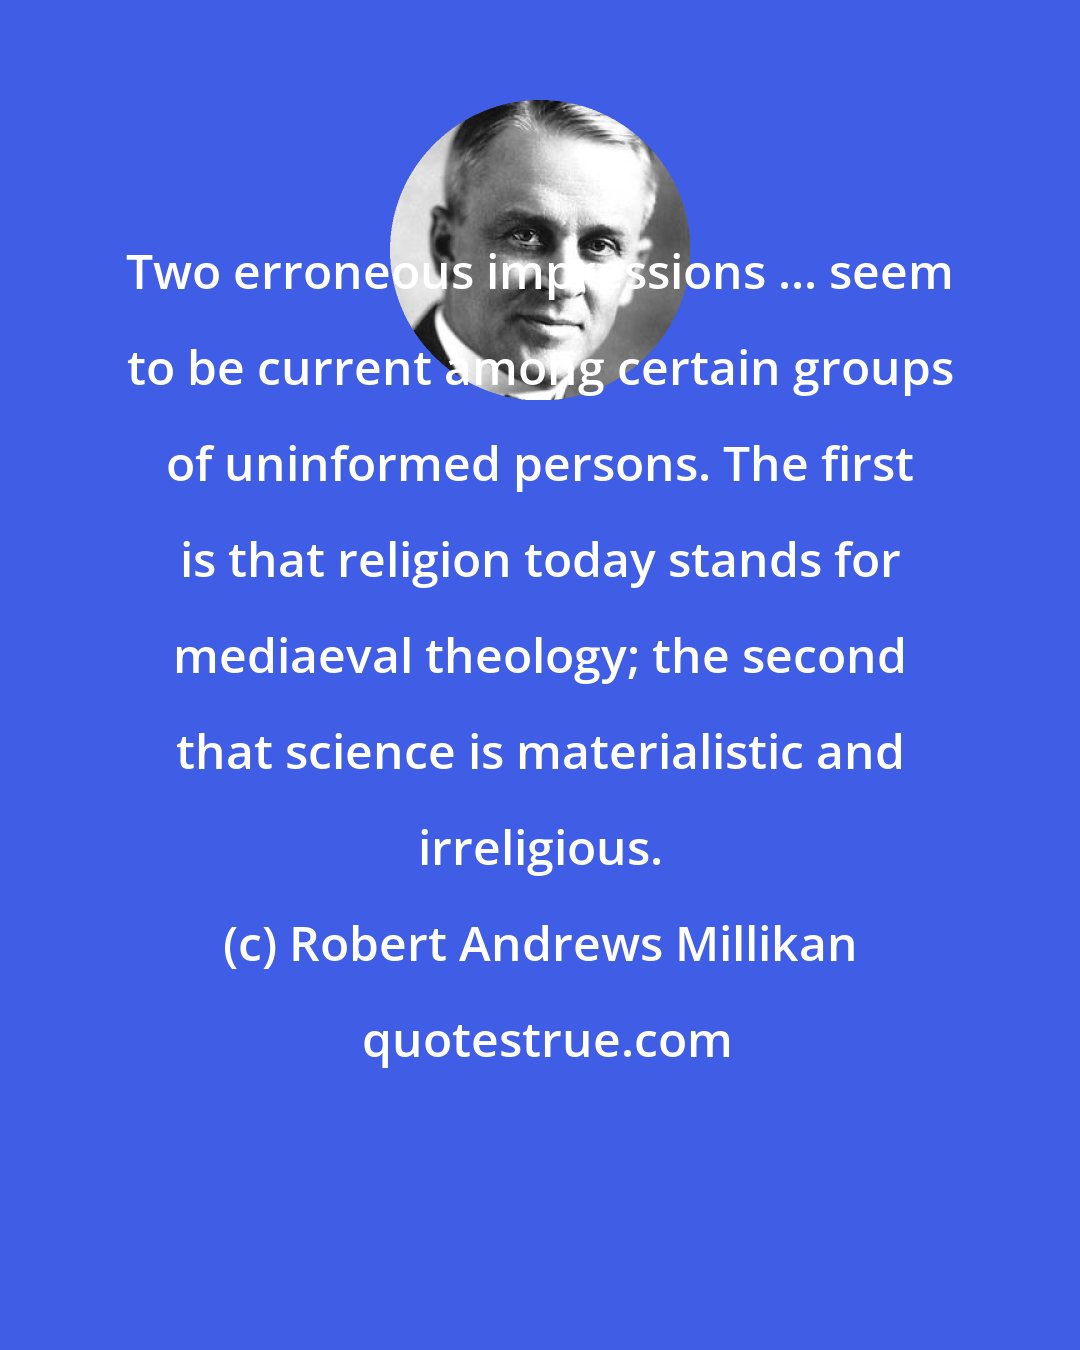 Robert Andrews Millikan: Two erroneous impressions ... seem to be current among certain groups of uninformed persons. The first is that religion today stands for mediaeval theology; the second that science is materialistic and irreligious.